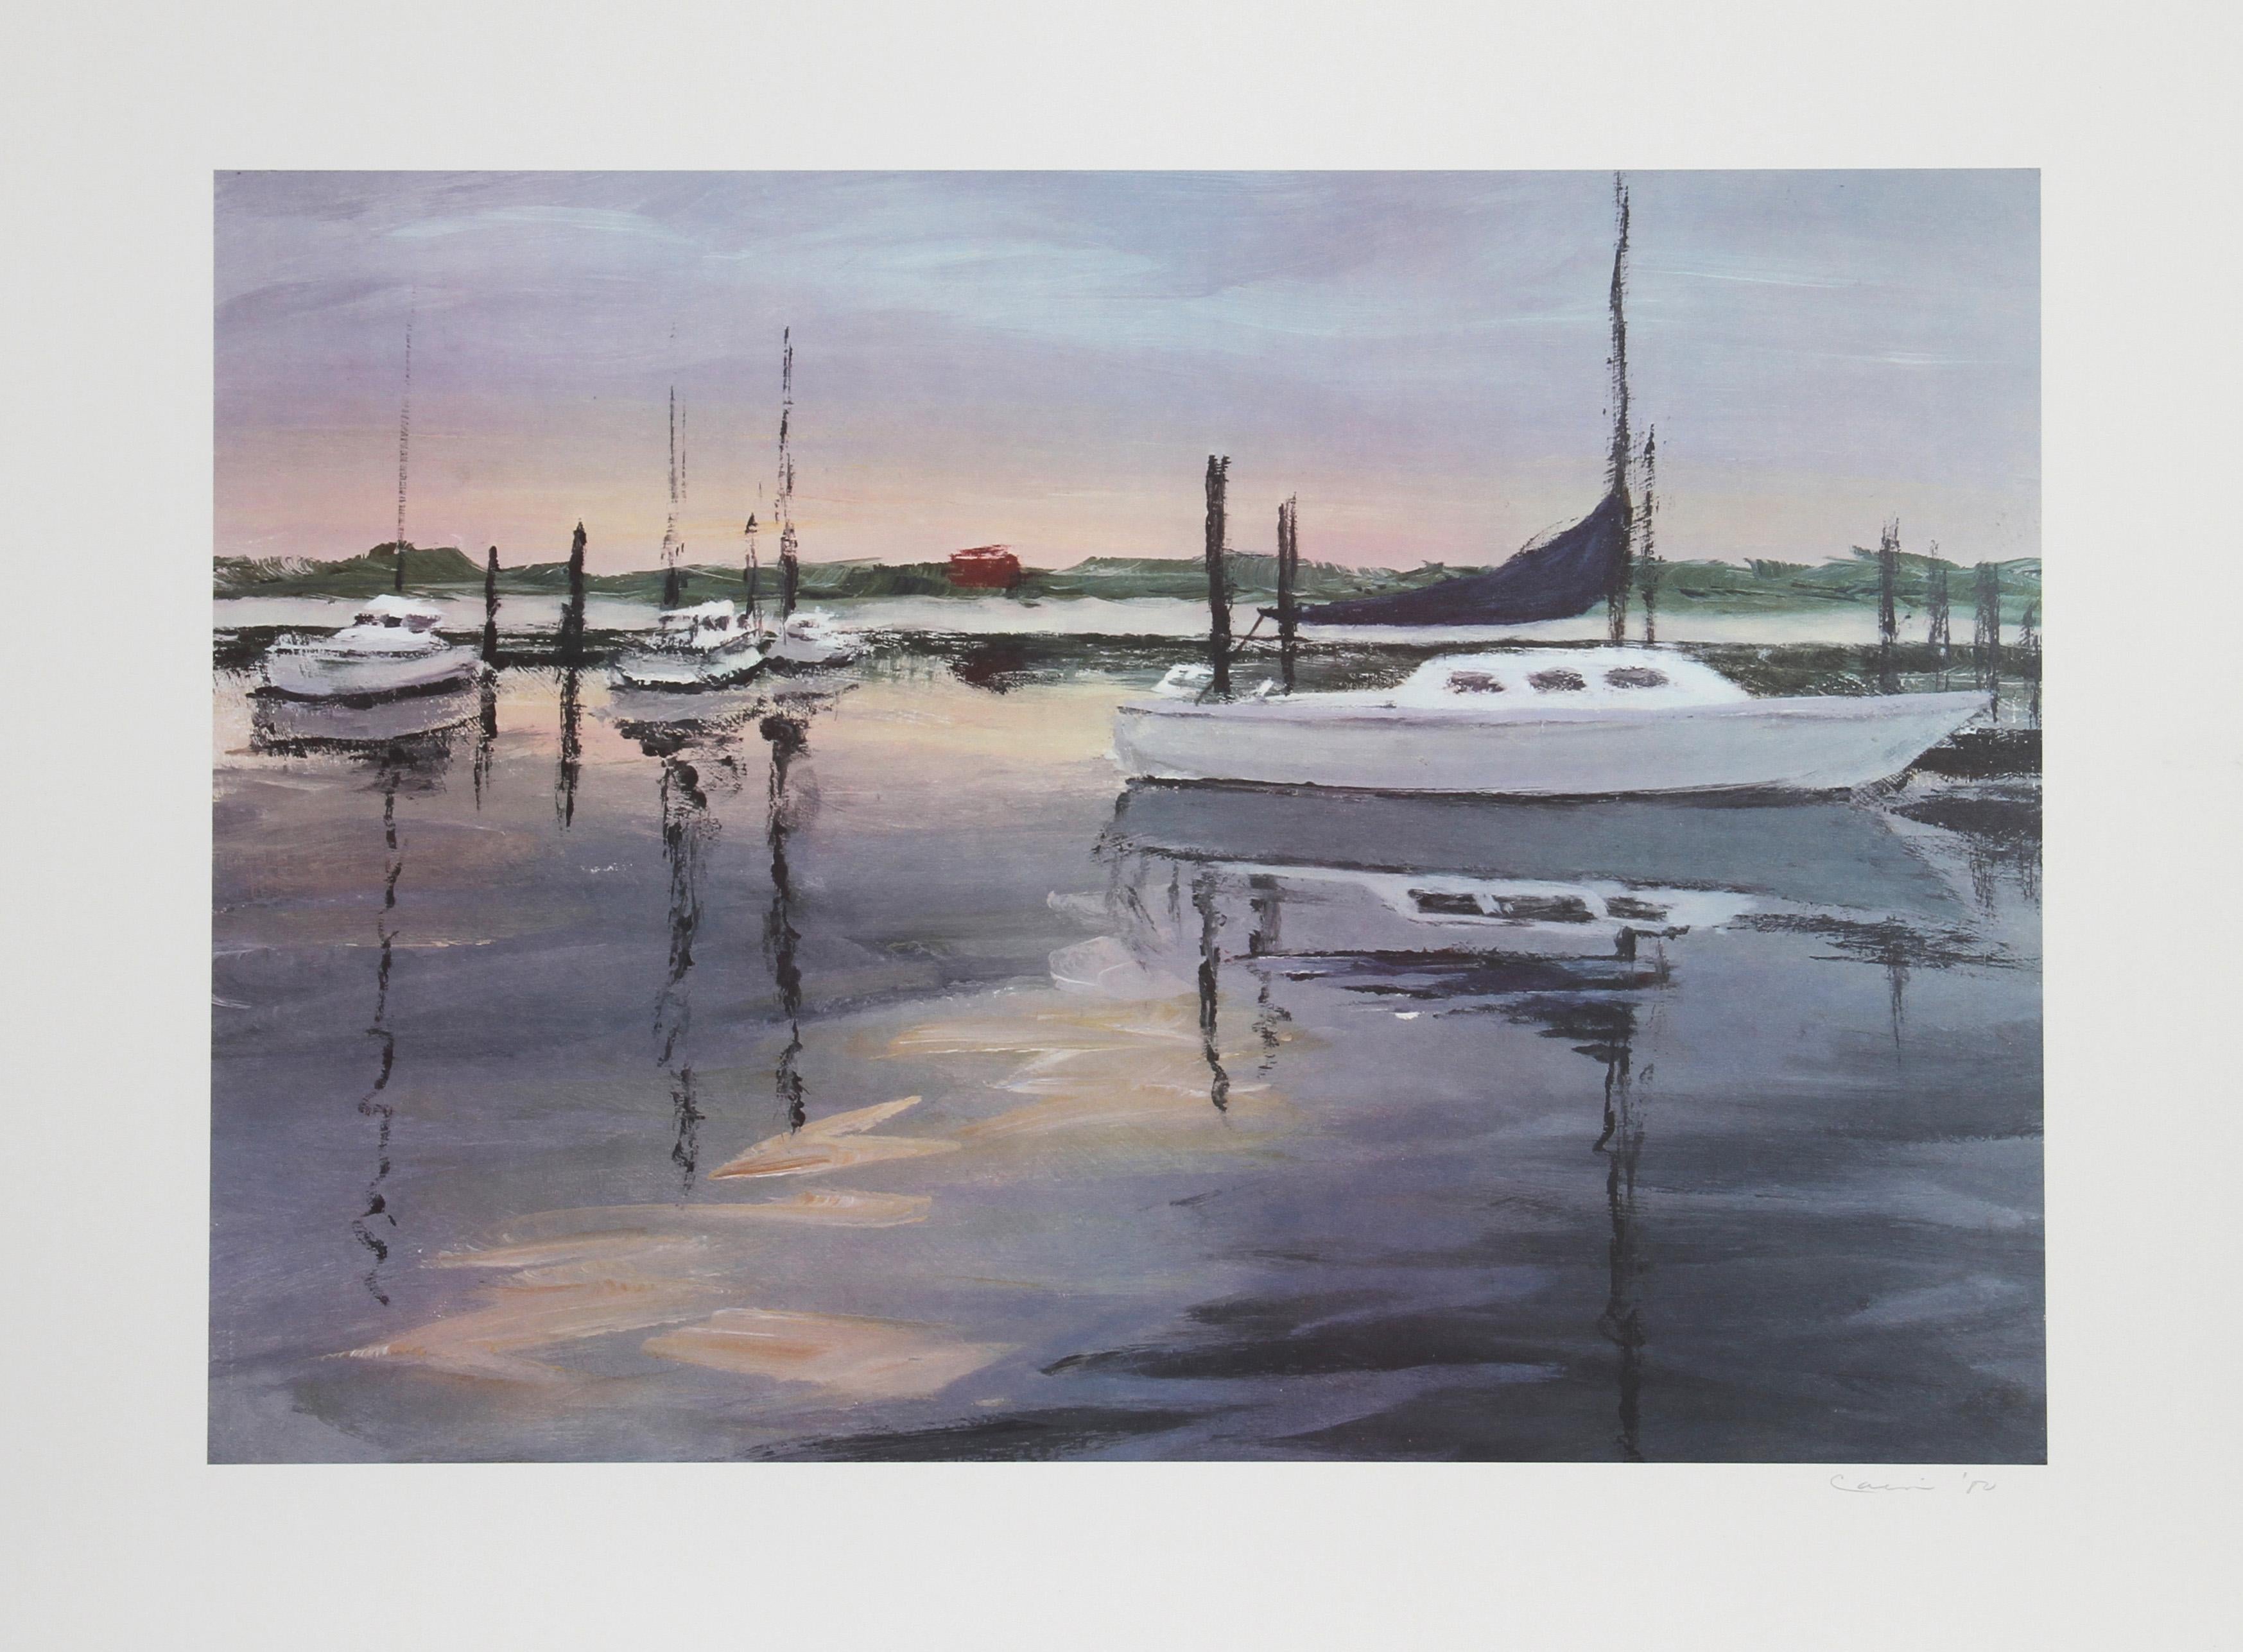 David Cain’s serene depiction of a seaside marina is filled with the light of the setting sun reflecting off of the placid water beside the bobbing boats.

Clinton Marina
David Cain, American (1928–2017)
Date: Circa 1980
Lithograph, signed and